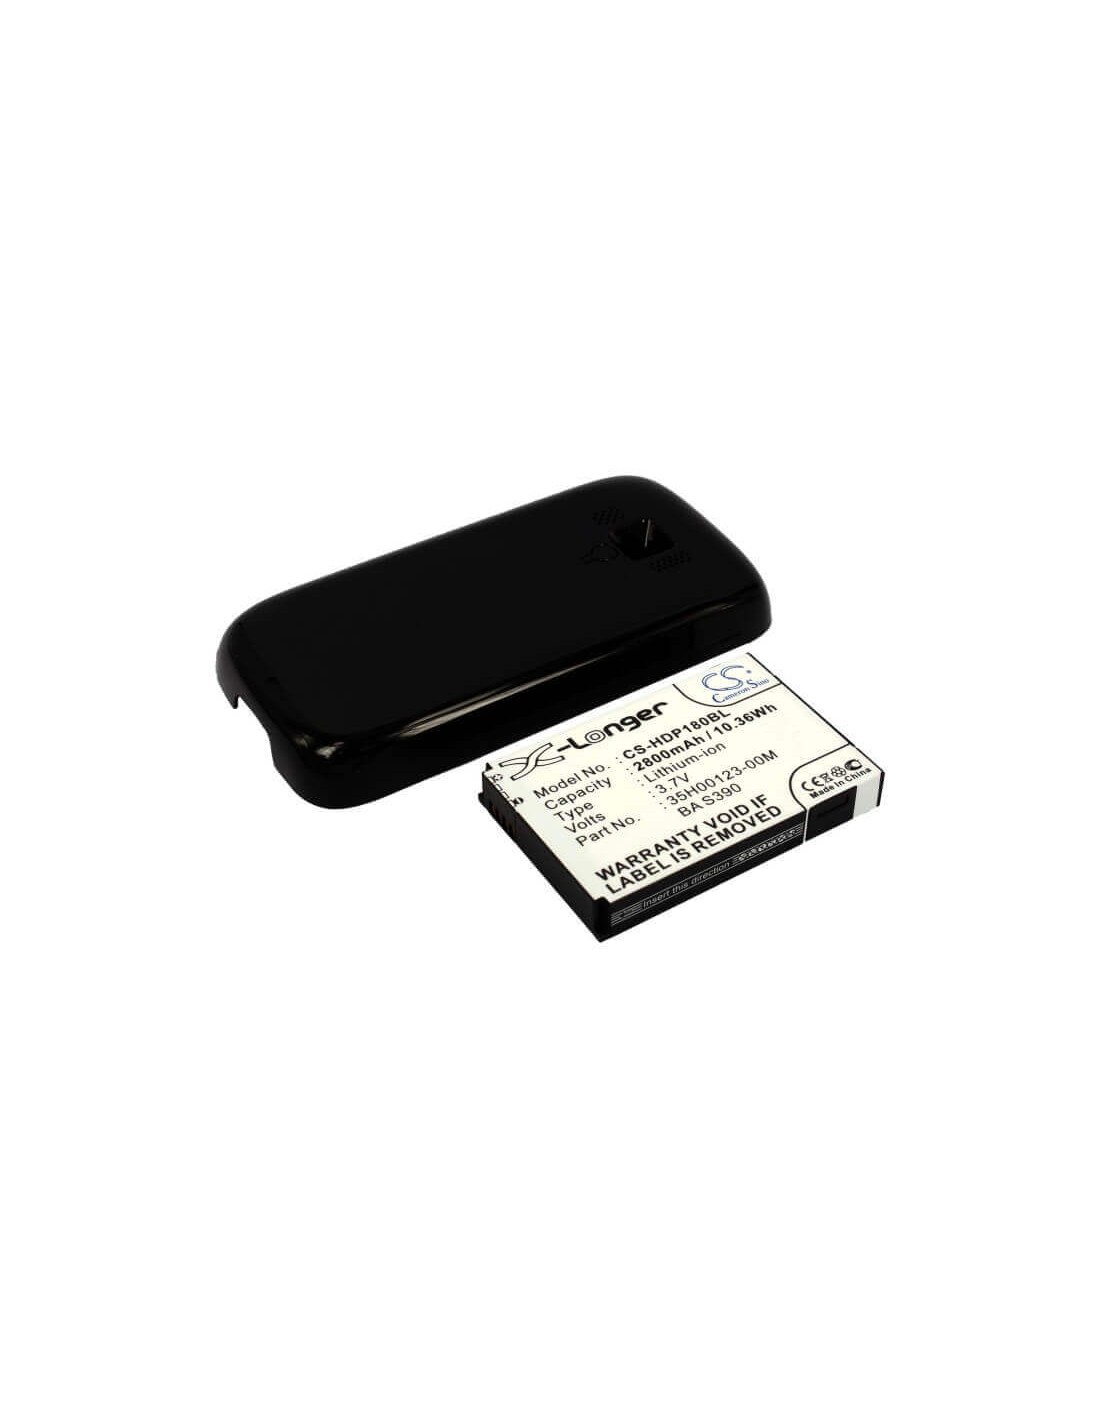 Battery for HTC Touch Pro 2, Touch Pro II, T7373, black back cover 3.7V, 2800mAh - 10.36Wh